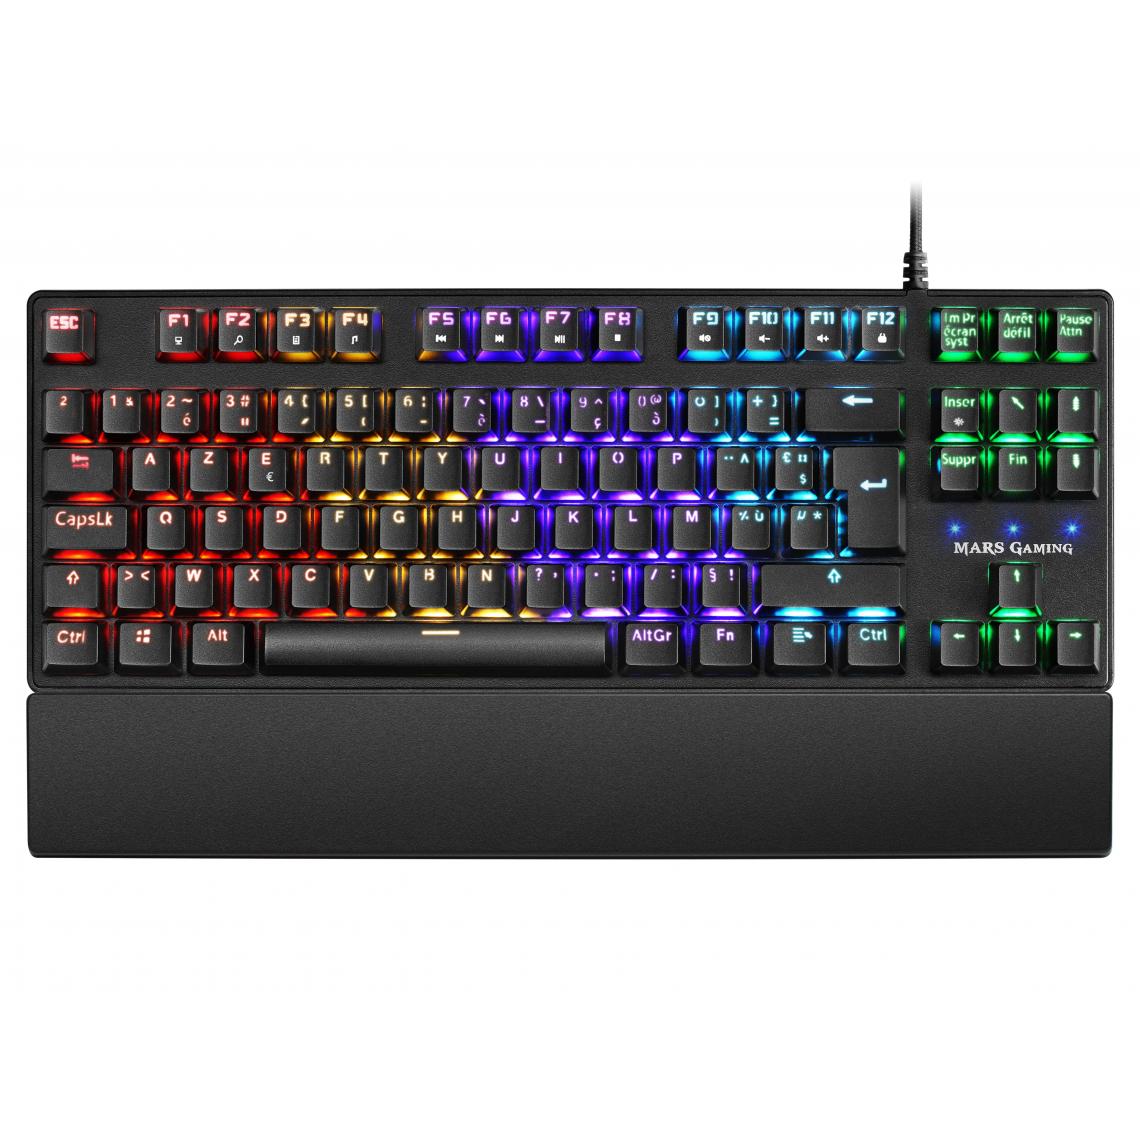 Mars Gaming - Clavier Gamer mécanique (Outemu Blue Switch) MKXTKL RGB (Noir) - Clavier